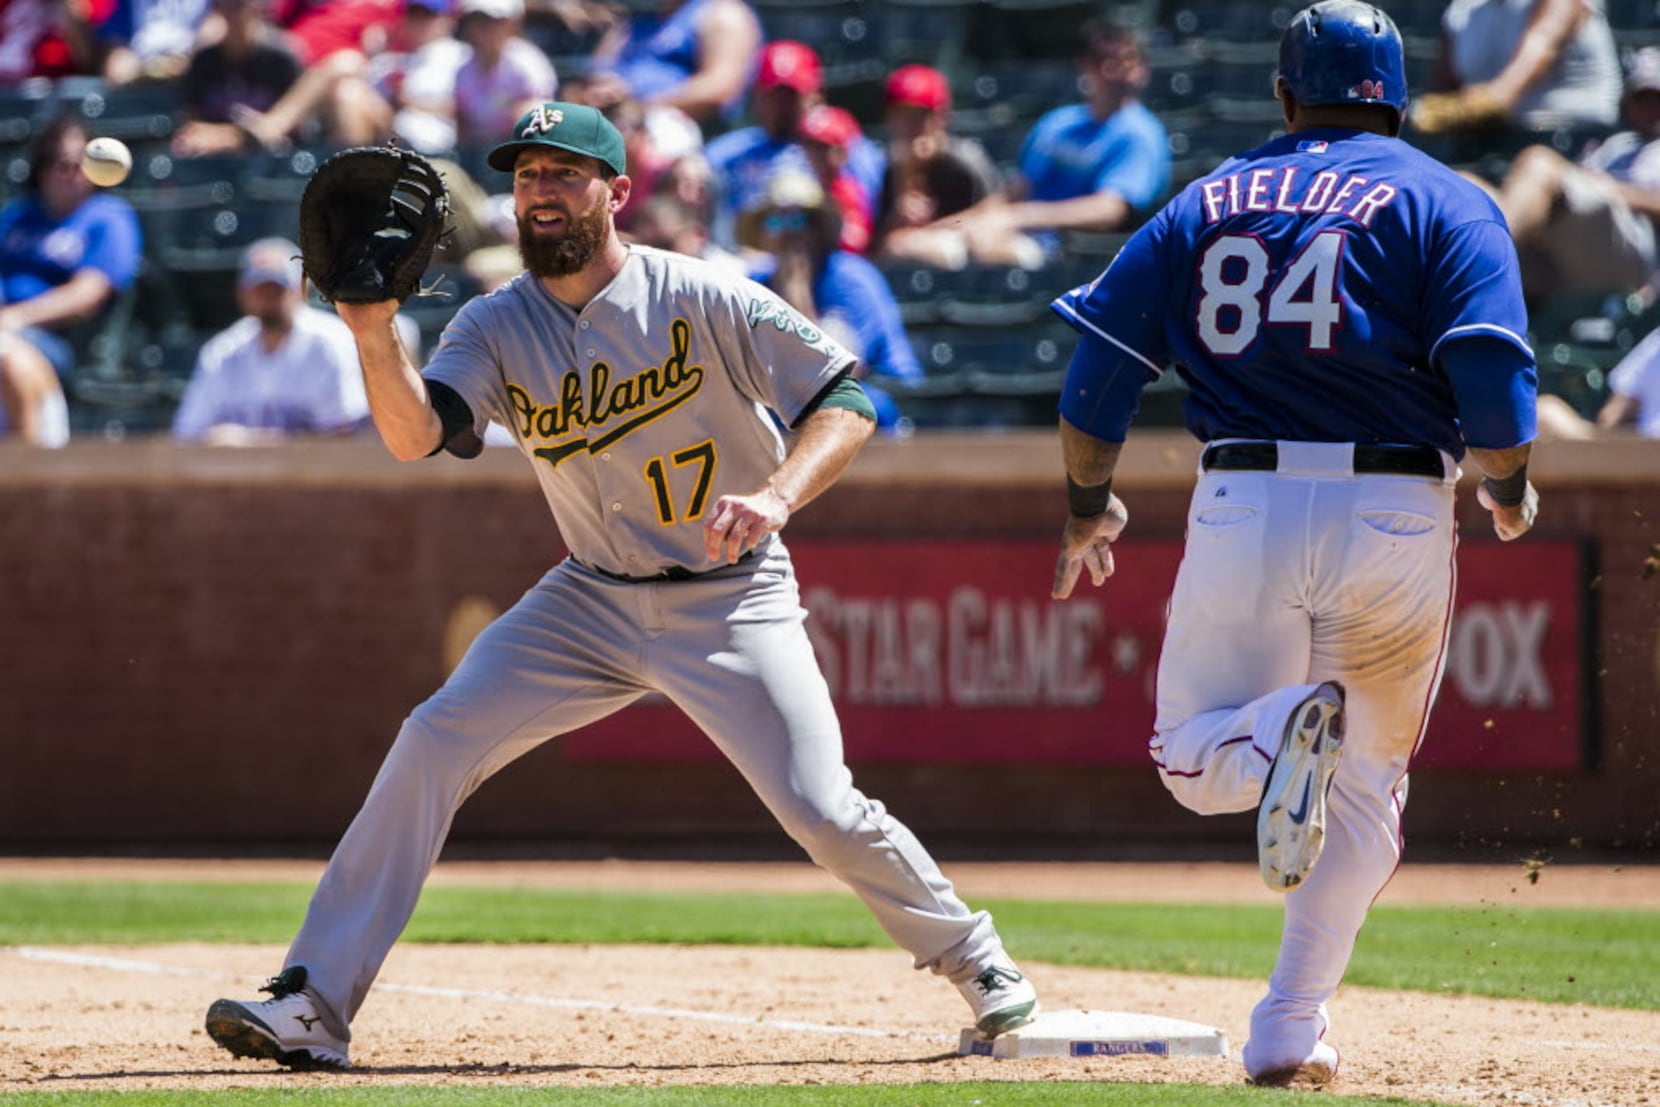 Source: Rangers to sign Ike Davis to minor league contract